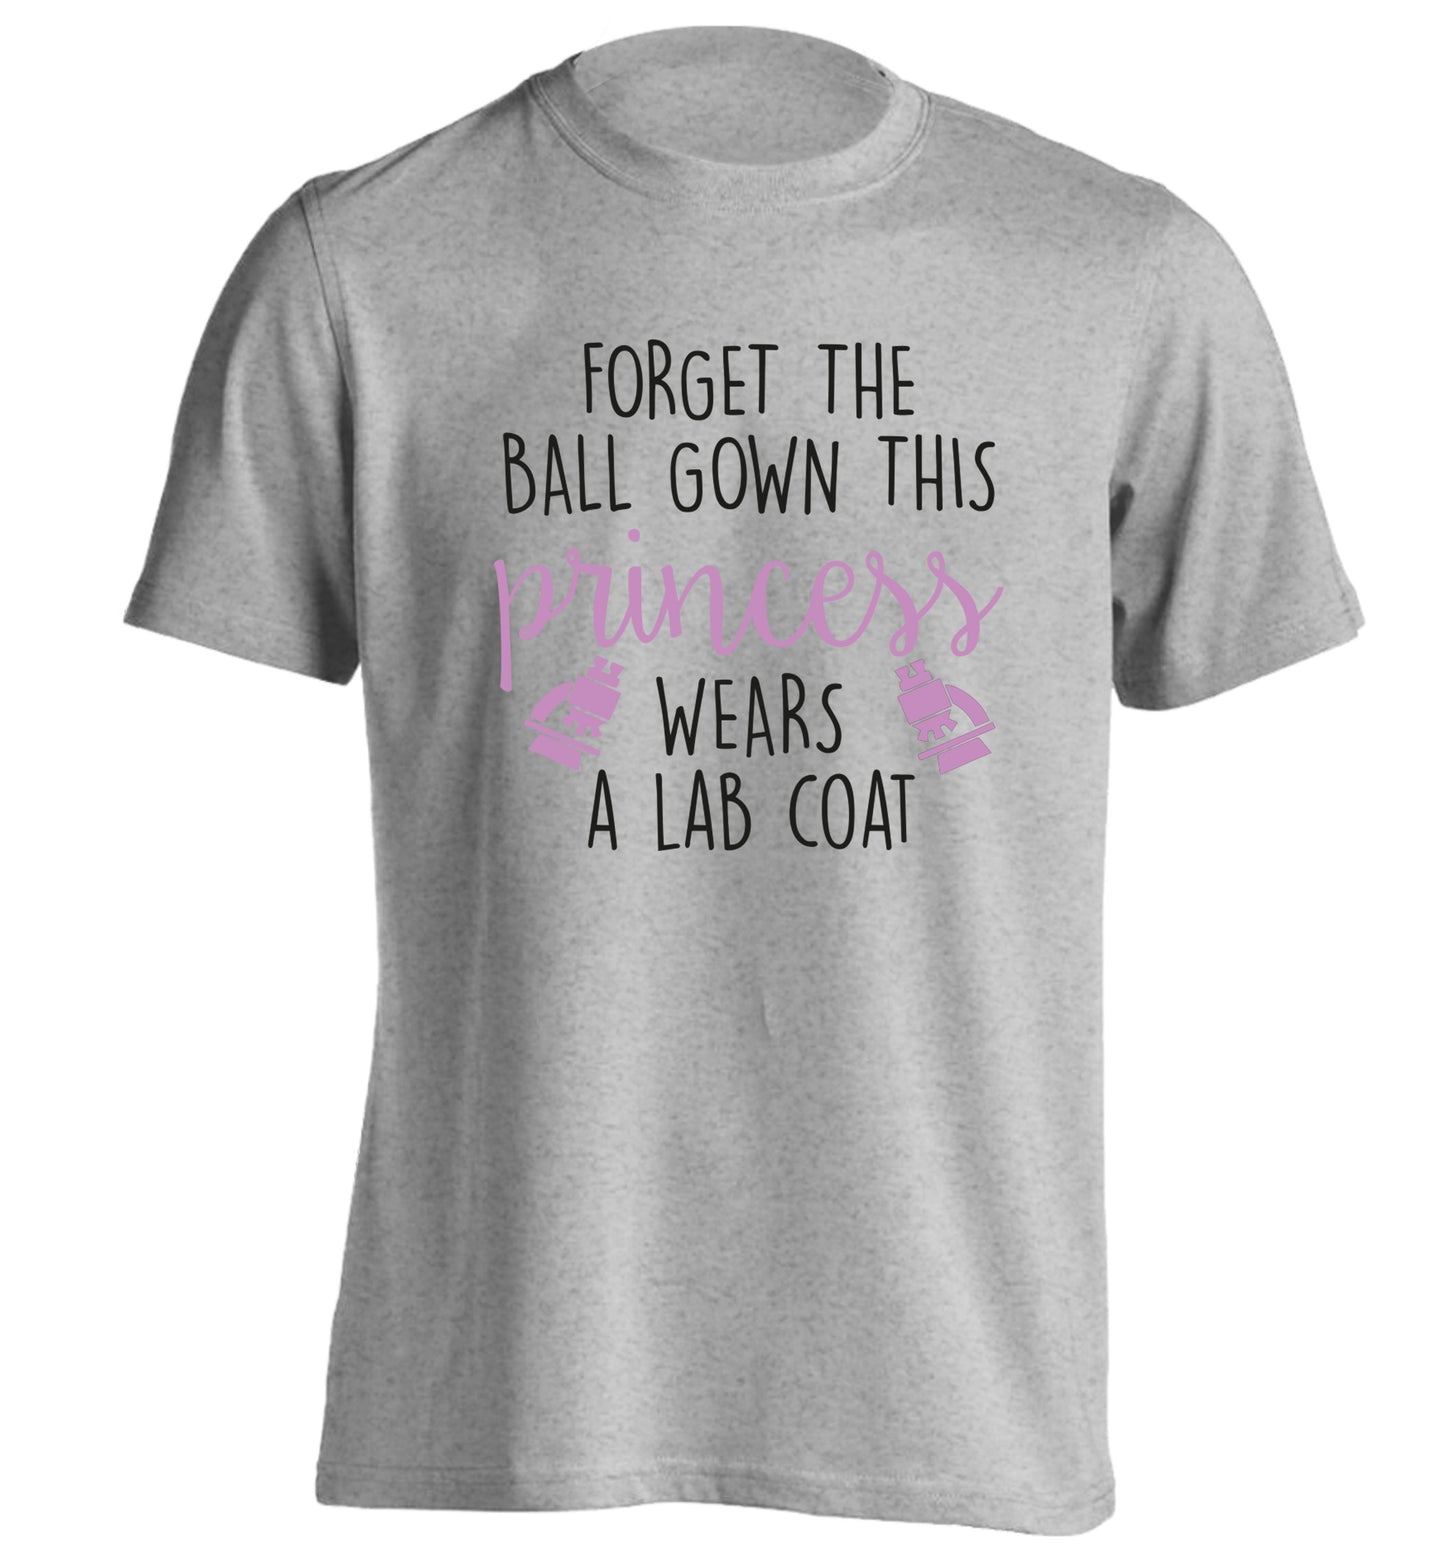 Forget the ball gown this princess wears a lab coat adults unisex grey Tshirt 2XL